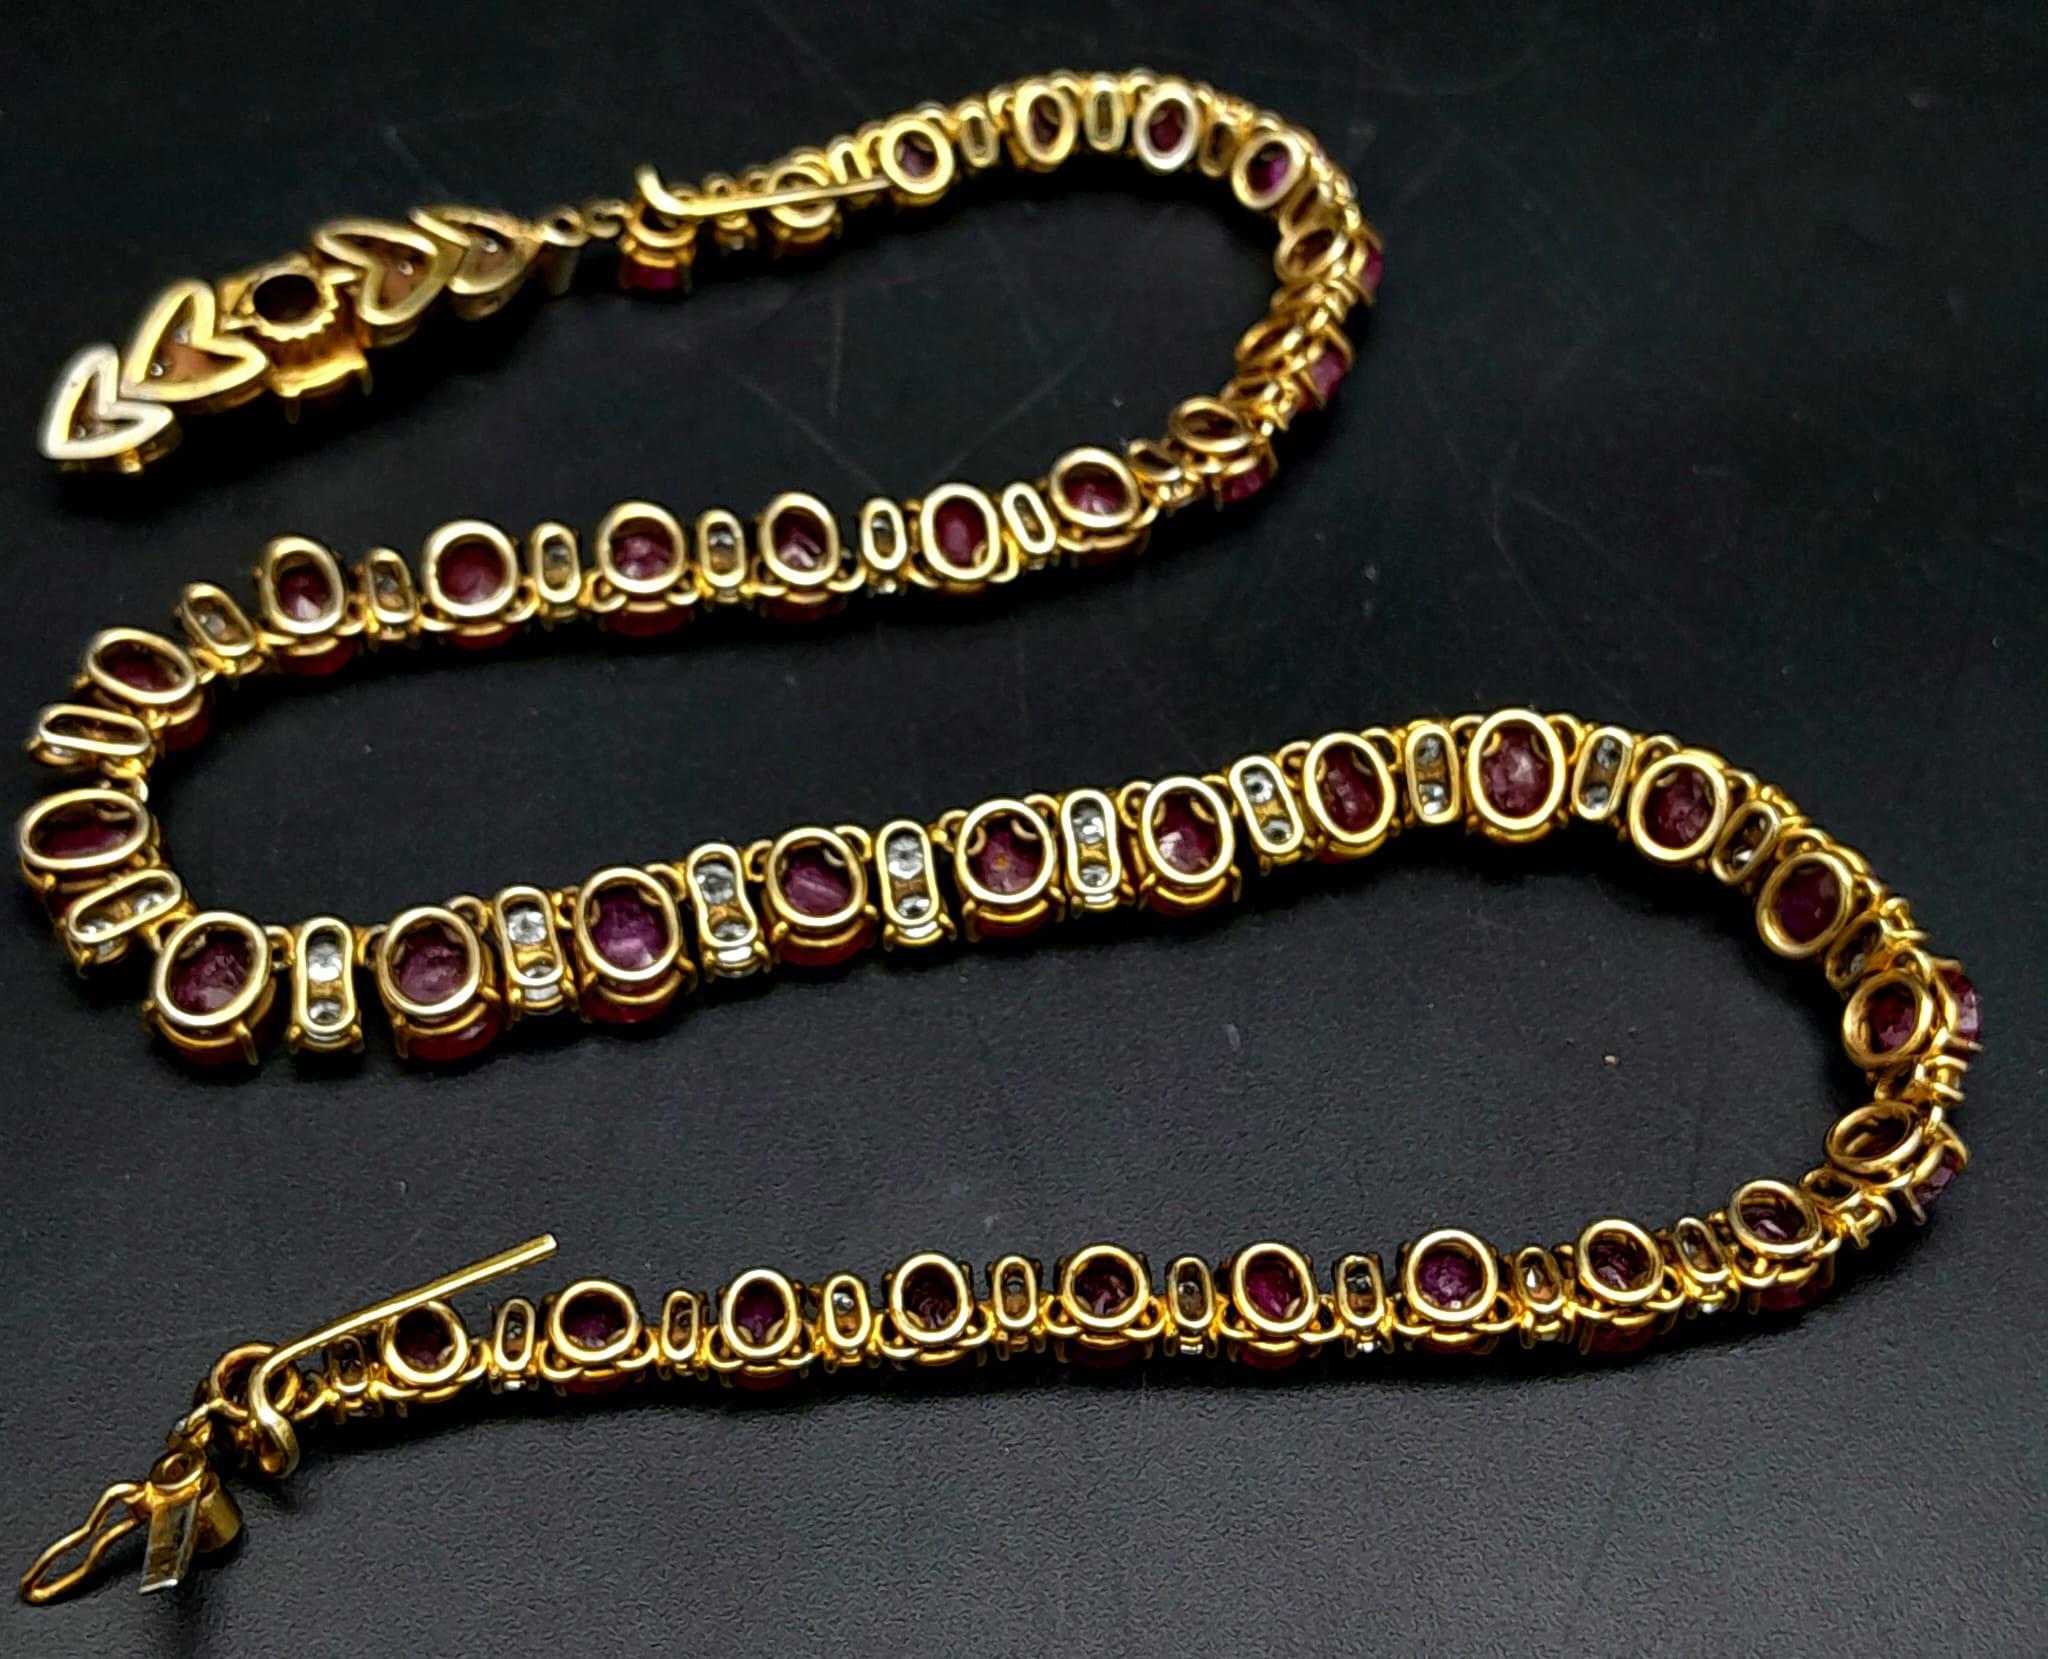 A vintage, 9 K yellow gold necklace loaded with oval cut natural rubies and round cut diamonds. - Image 8 of 10